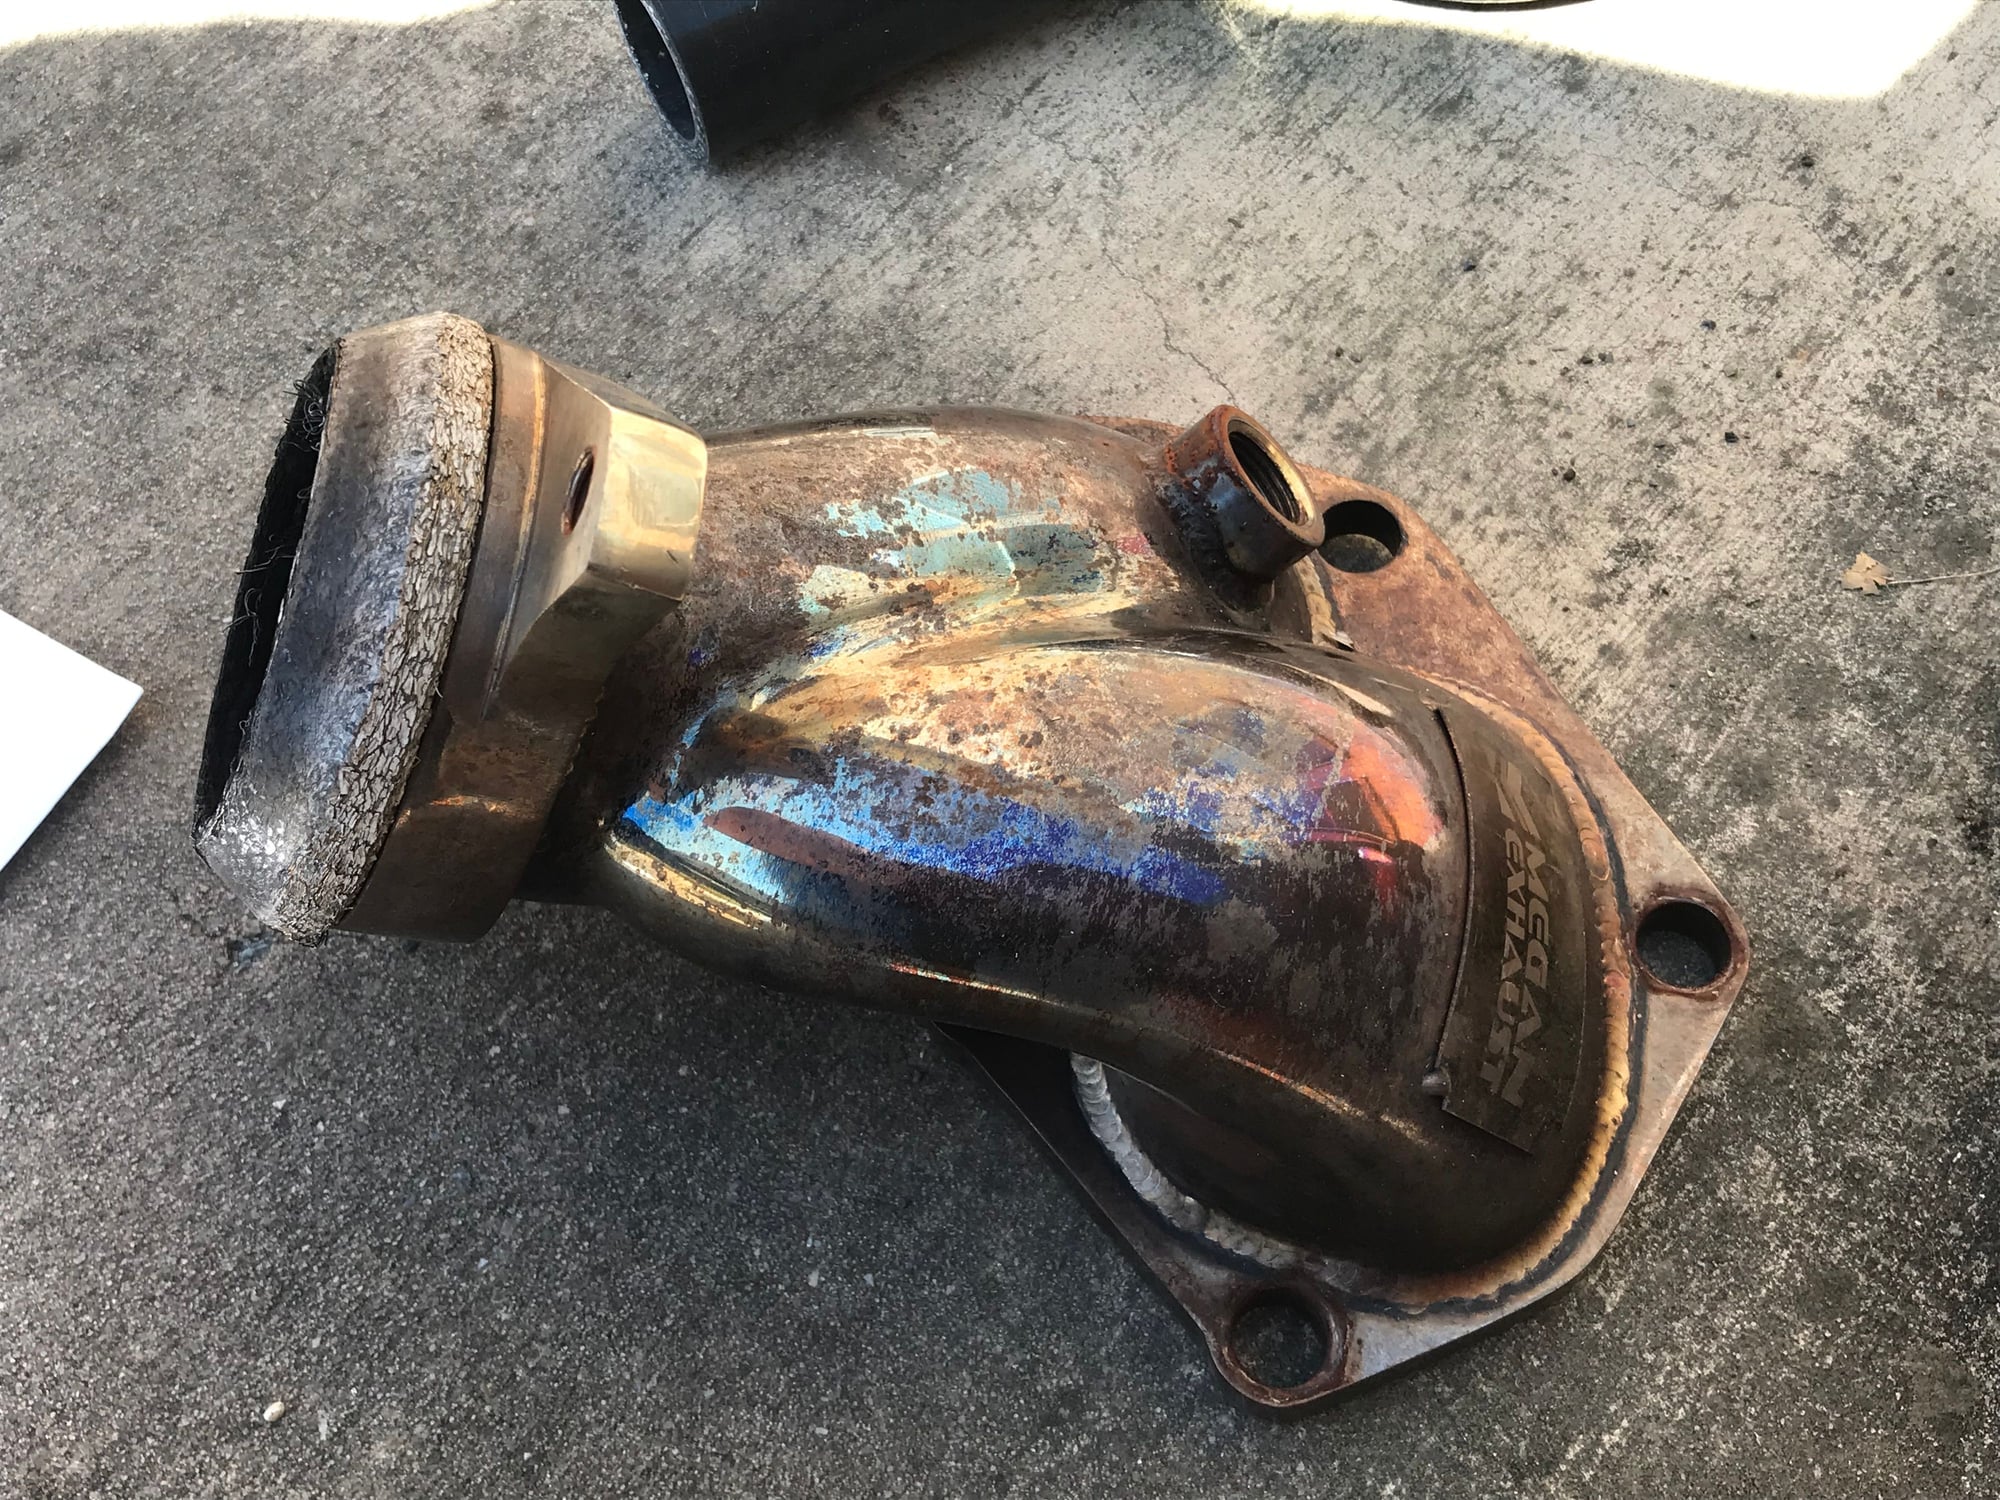 Miscellaneous - Evo 8/9 Parts Cheap Will Take Offers - Used - 2003 to 2006 Mitsubishi Lancer Evolution - Plano, TX 75024, United States